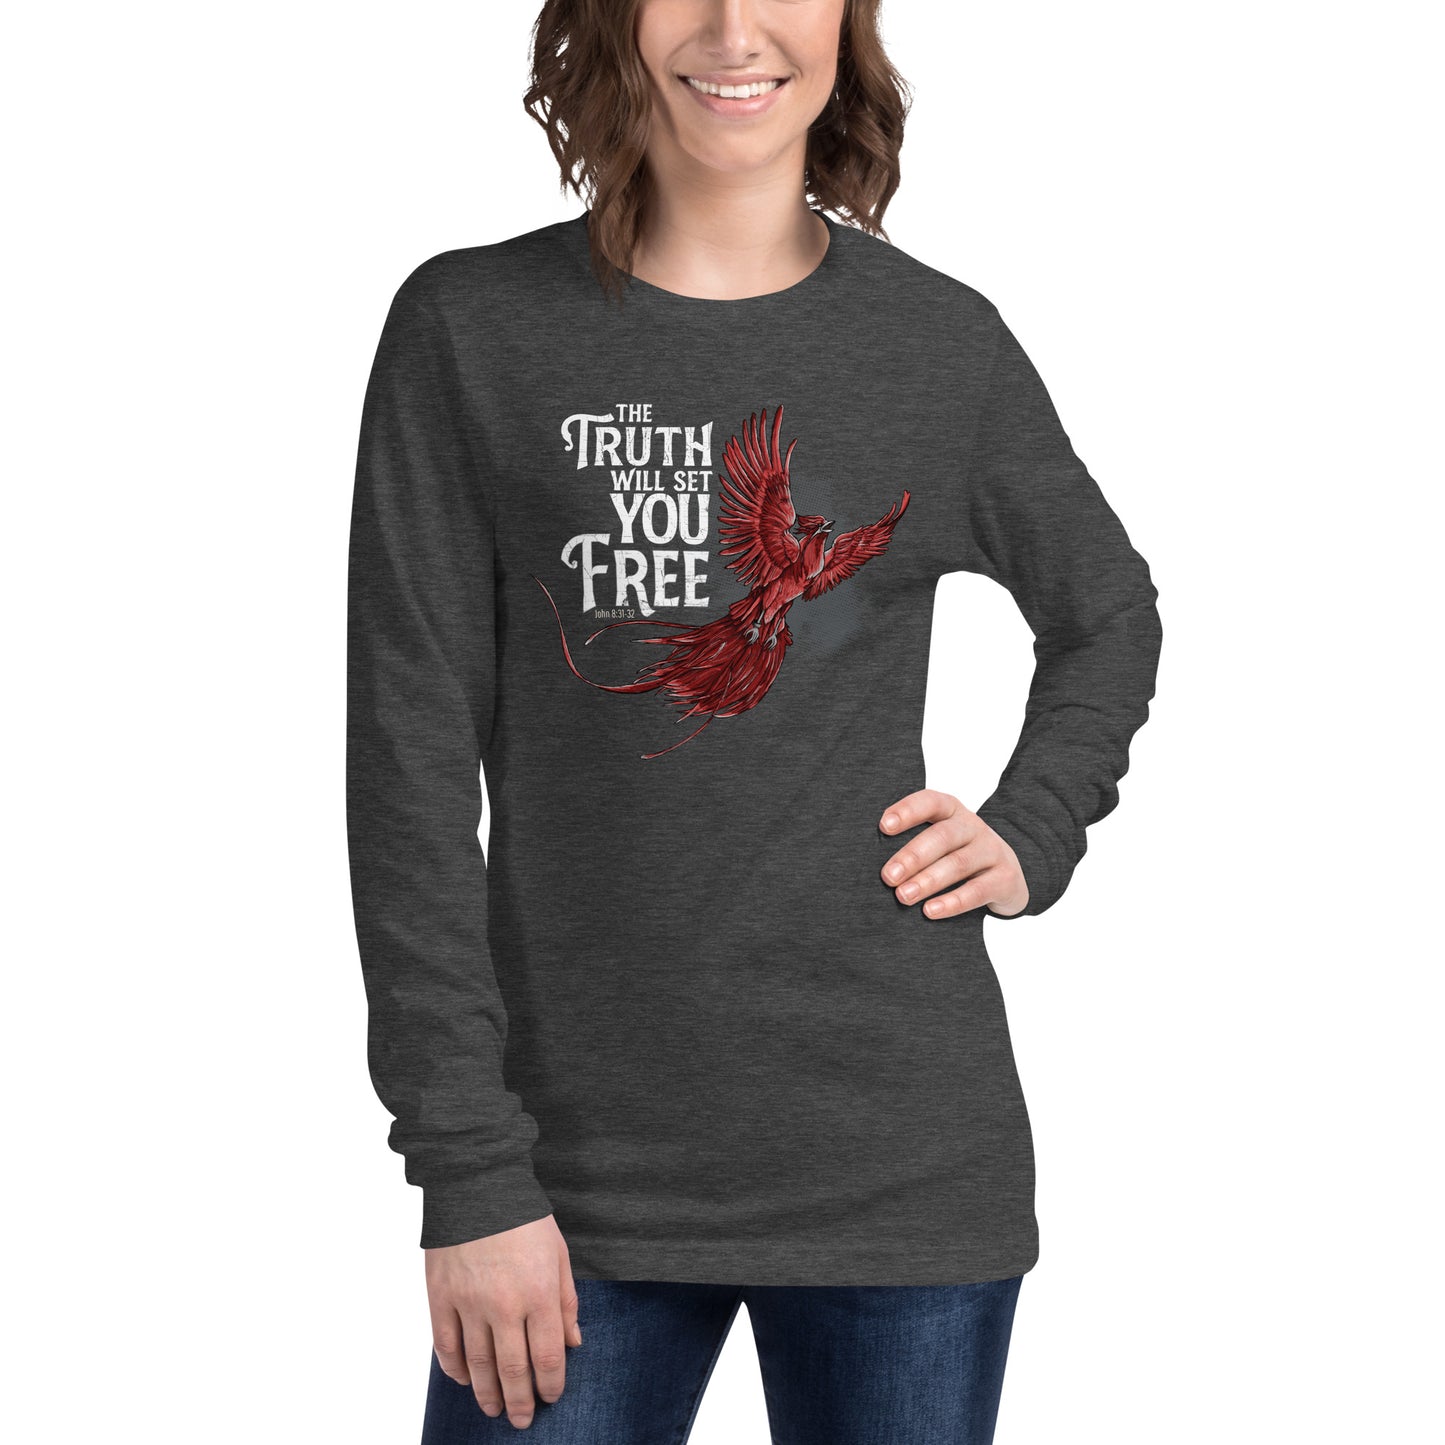 The Truth Will Set You Free- Long Sleeve Tee